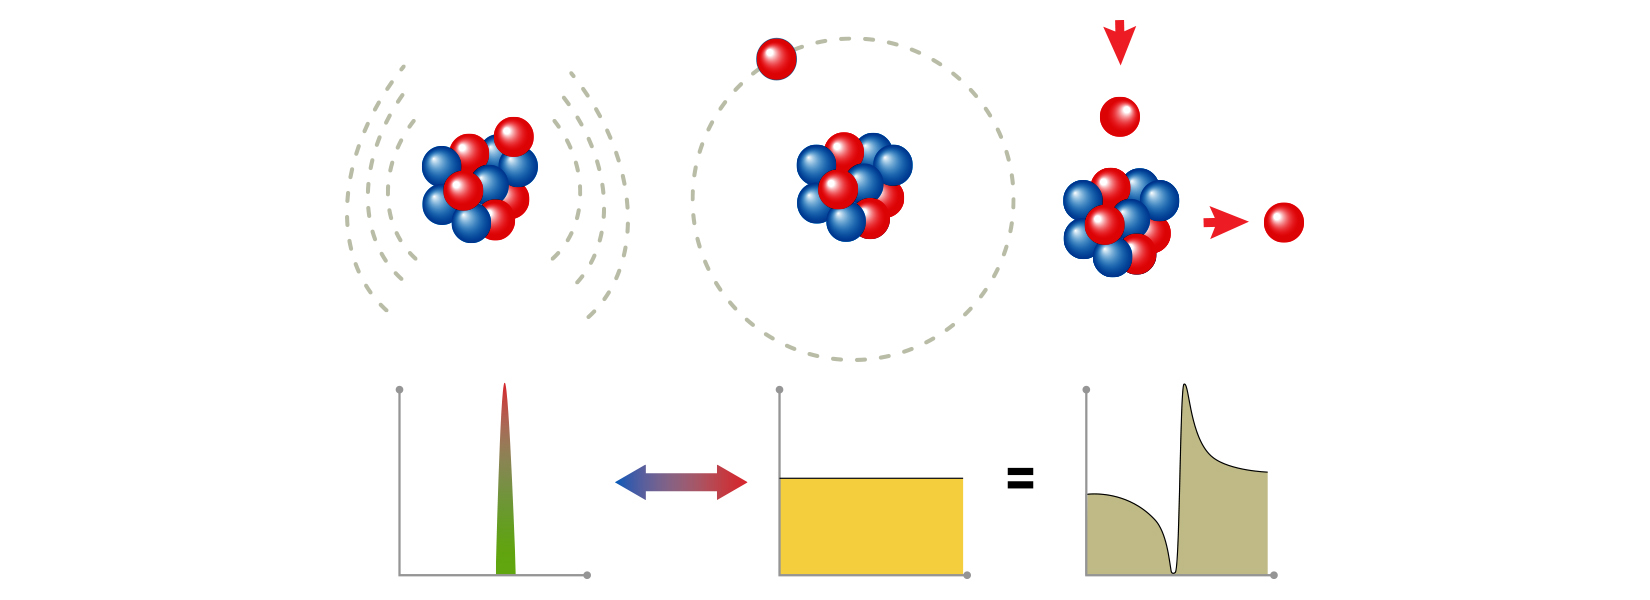 A figure with three panels starts with one on the left showing a single green spike on an x-y plane. Above is a collection of 11 red and blue orbs representing the protons and neutrons of boron-11. A two-headed arrow connects this to the center panel, which shows a yellow rectangle in an x-y plane with a beryllium-10 nucleus and a proton. The mixing of the two states results in the panel on the right show a light green wave shape. Above the wave is a beryllium-10 nucleus that’s shown accepting and ejecting a proton.